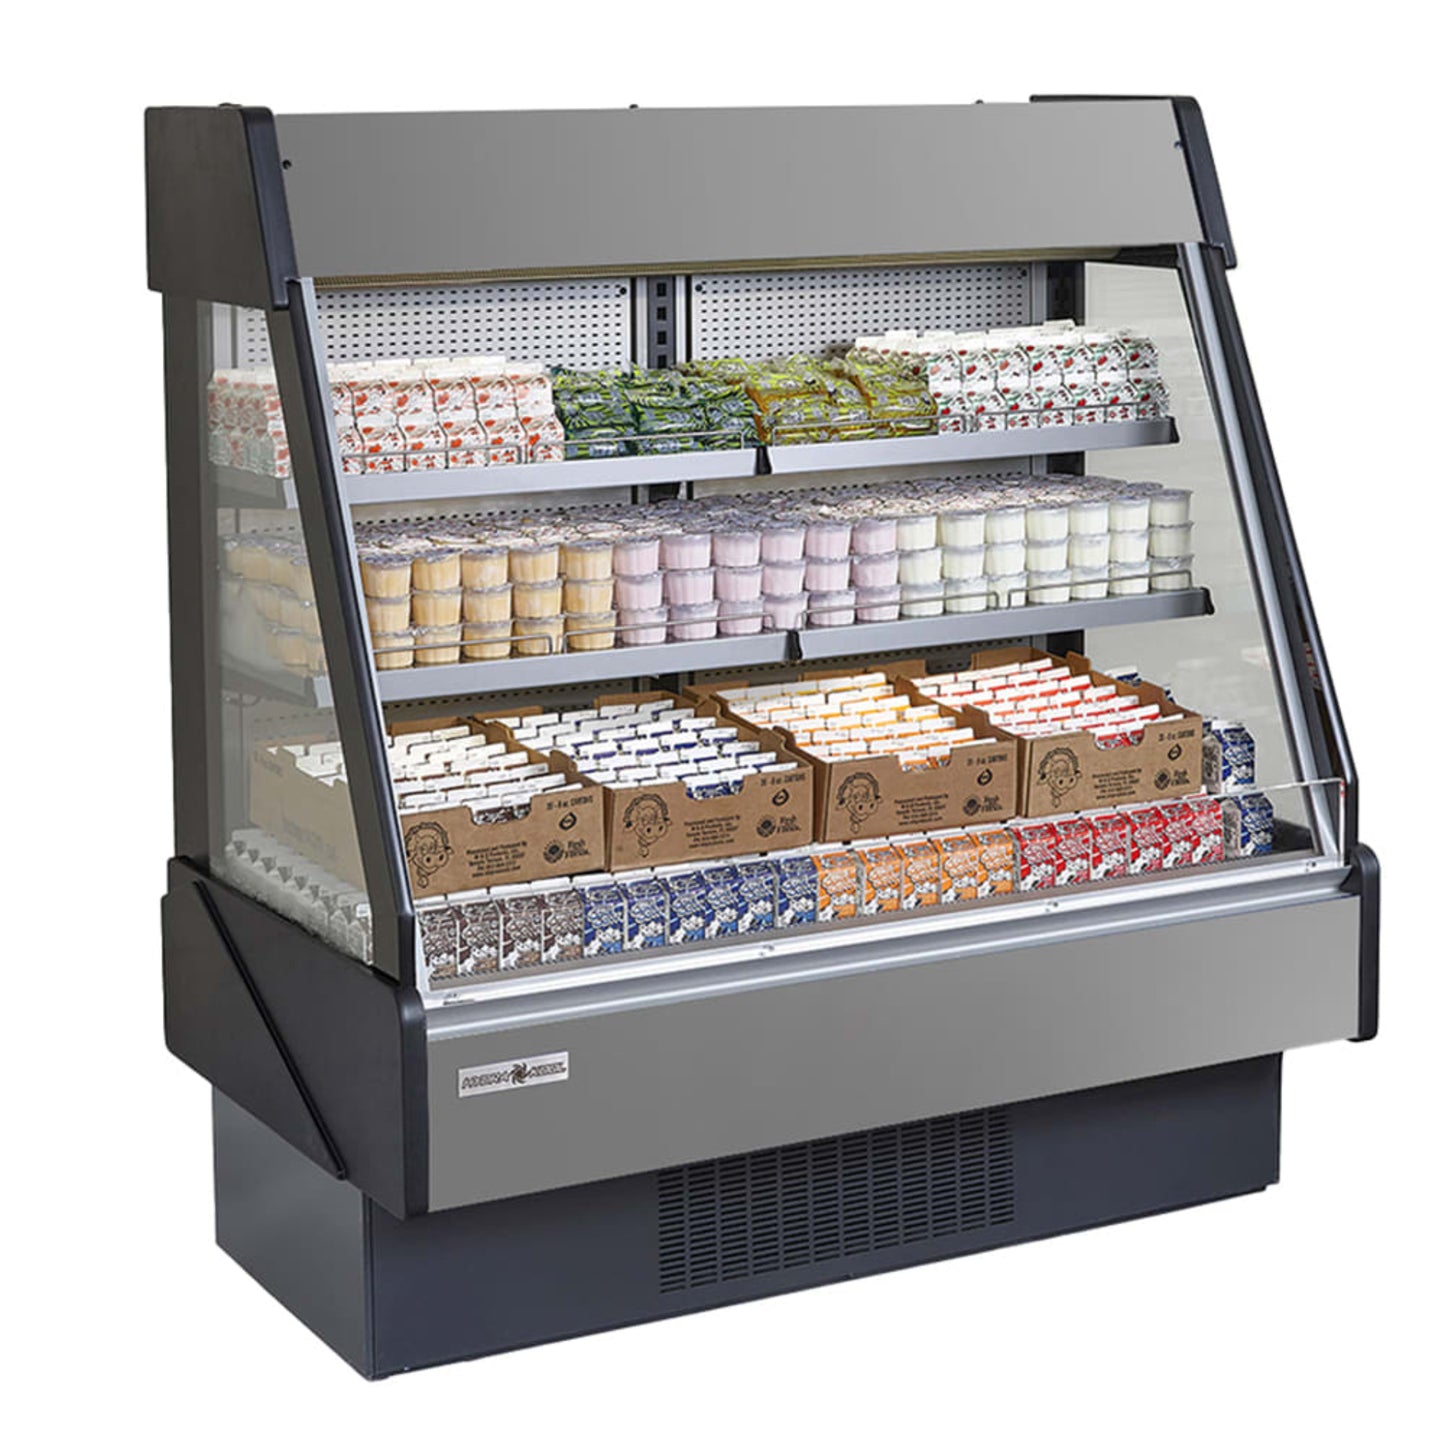 Hydra-Kool KGL-RM-60-S 60" Grab And Go Low Profile With Rear loading And Manual Front Shutter Self-Contained